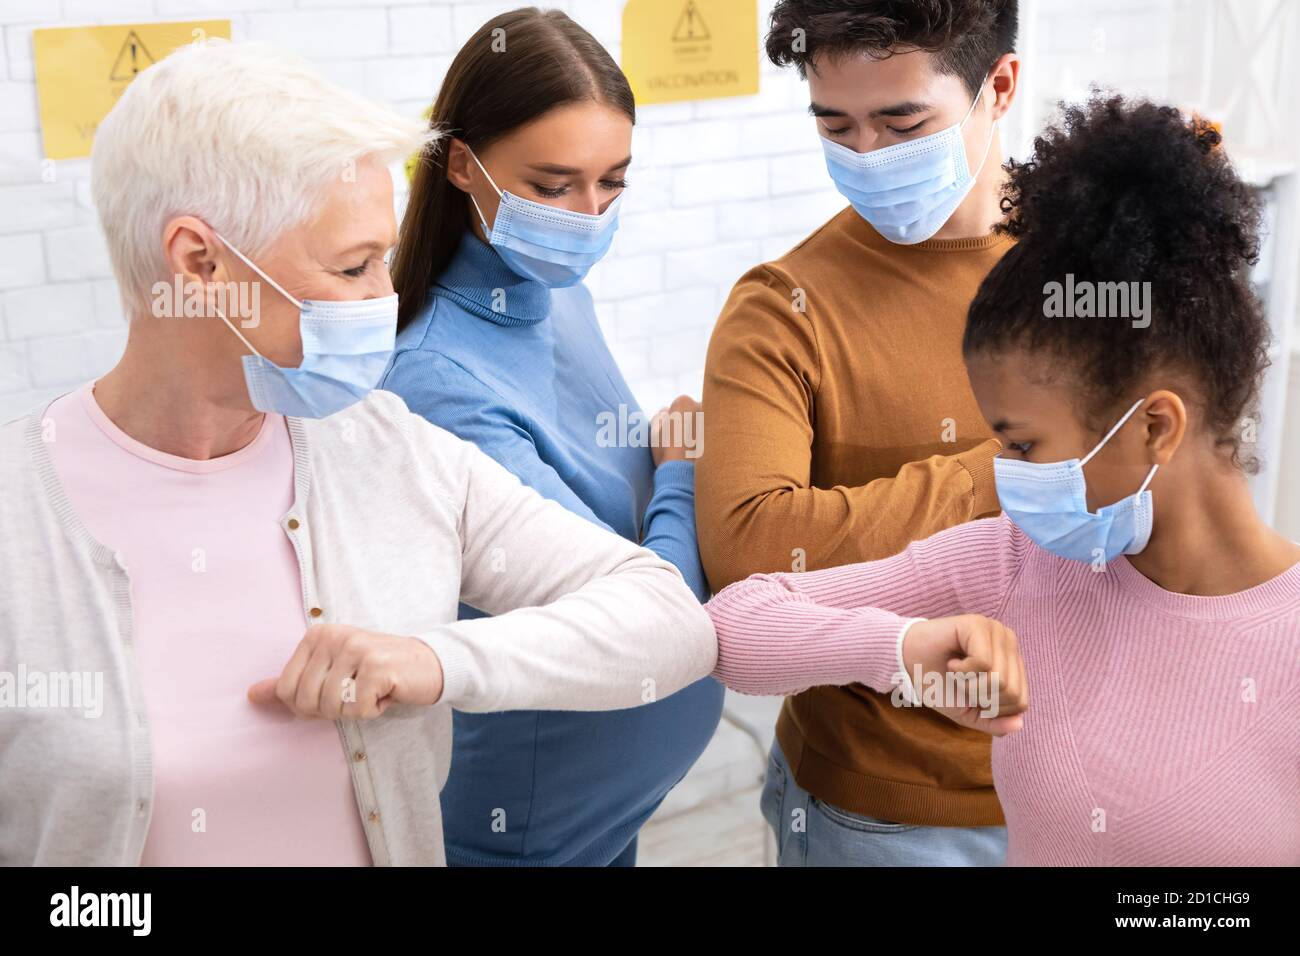 Group Of Diverse People Bumping Elbows Meeting Indoors Stock Photo